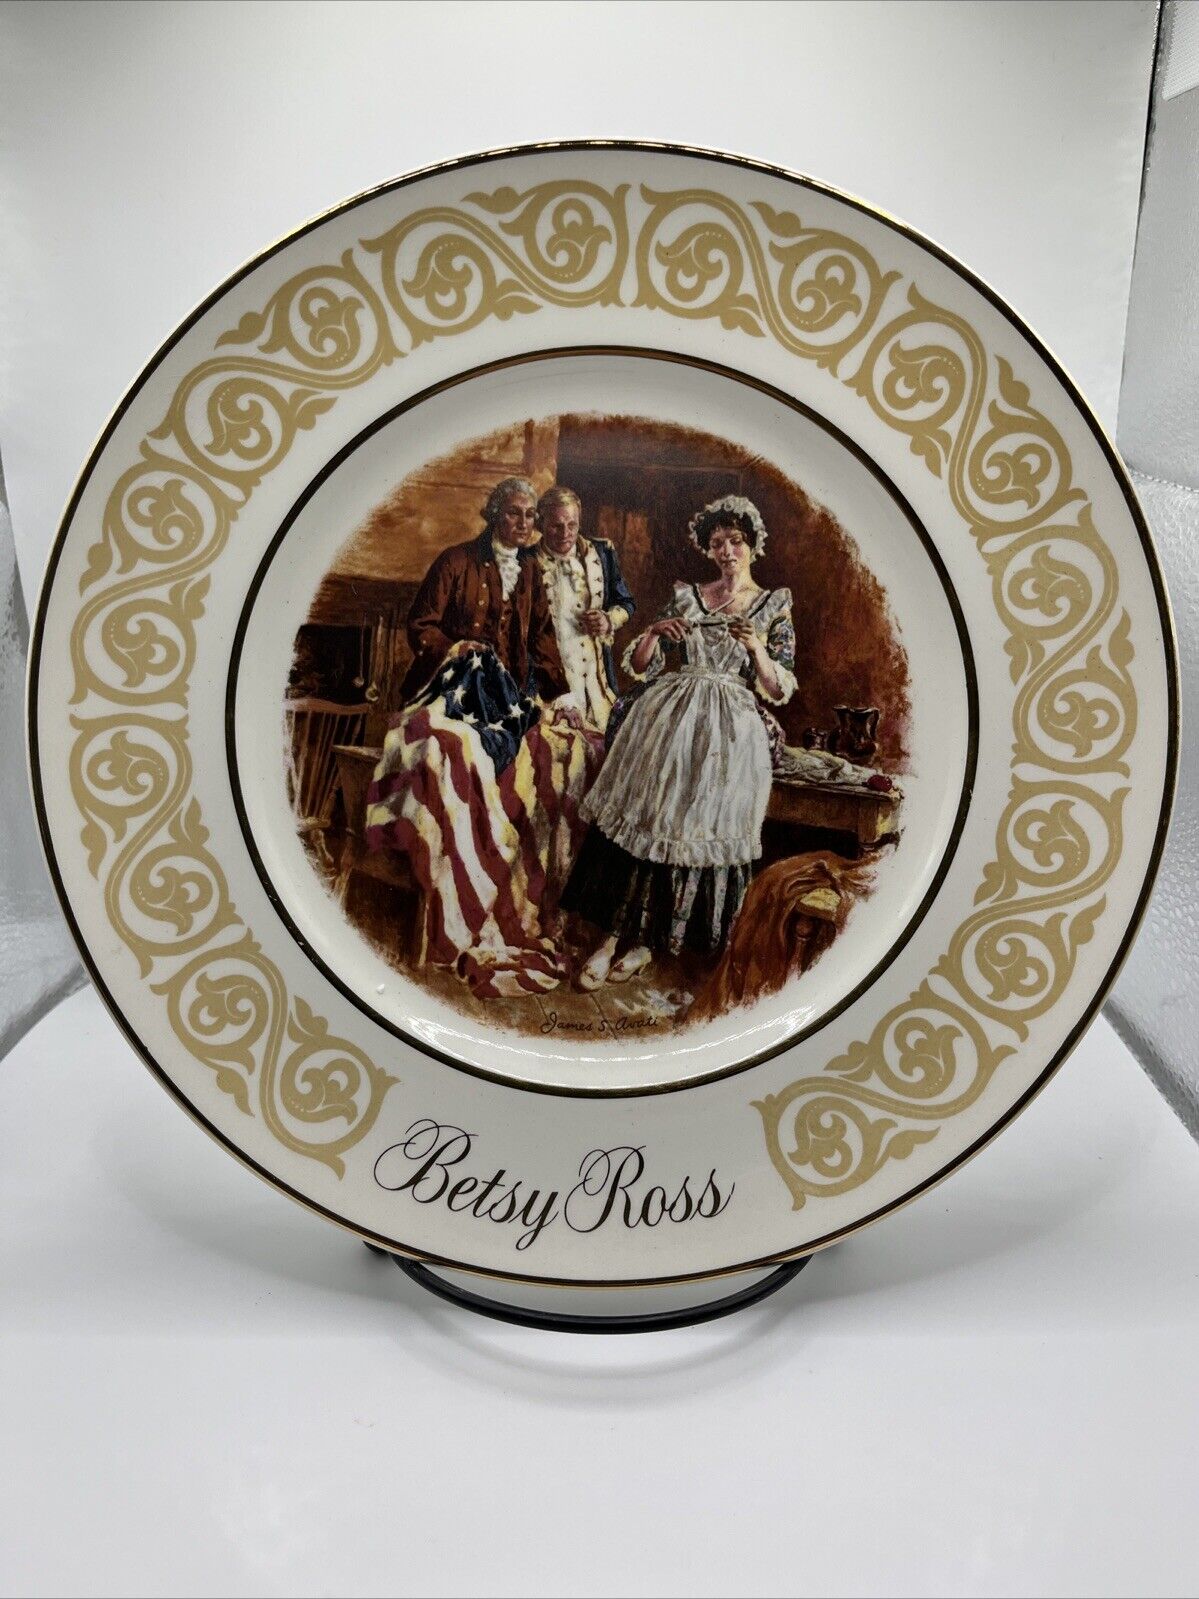 Vintage Avon 1973 Betsy Ross Collector Plate Used